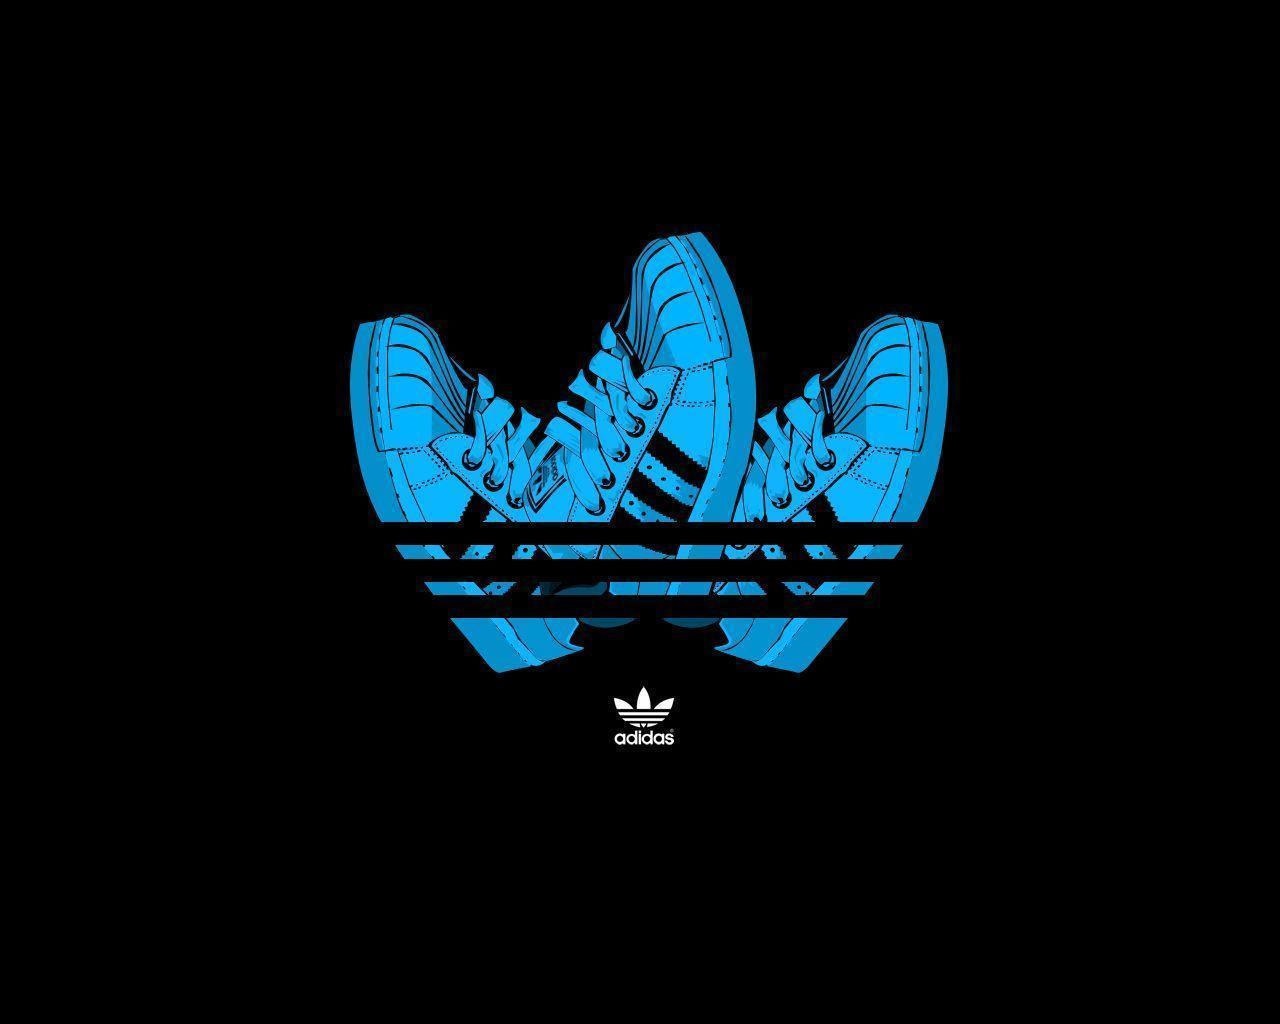 Hd Wallpaper Adidas Picture Gallery